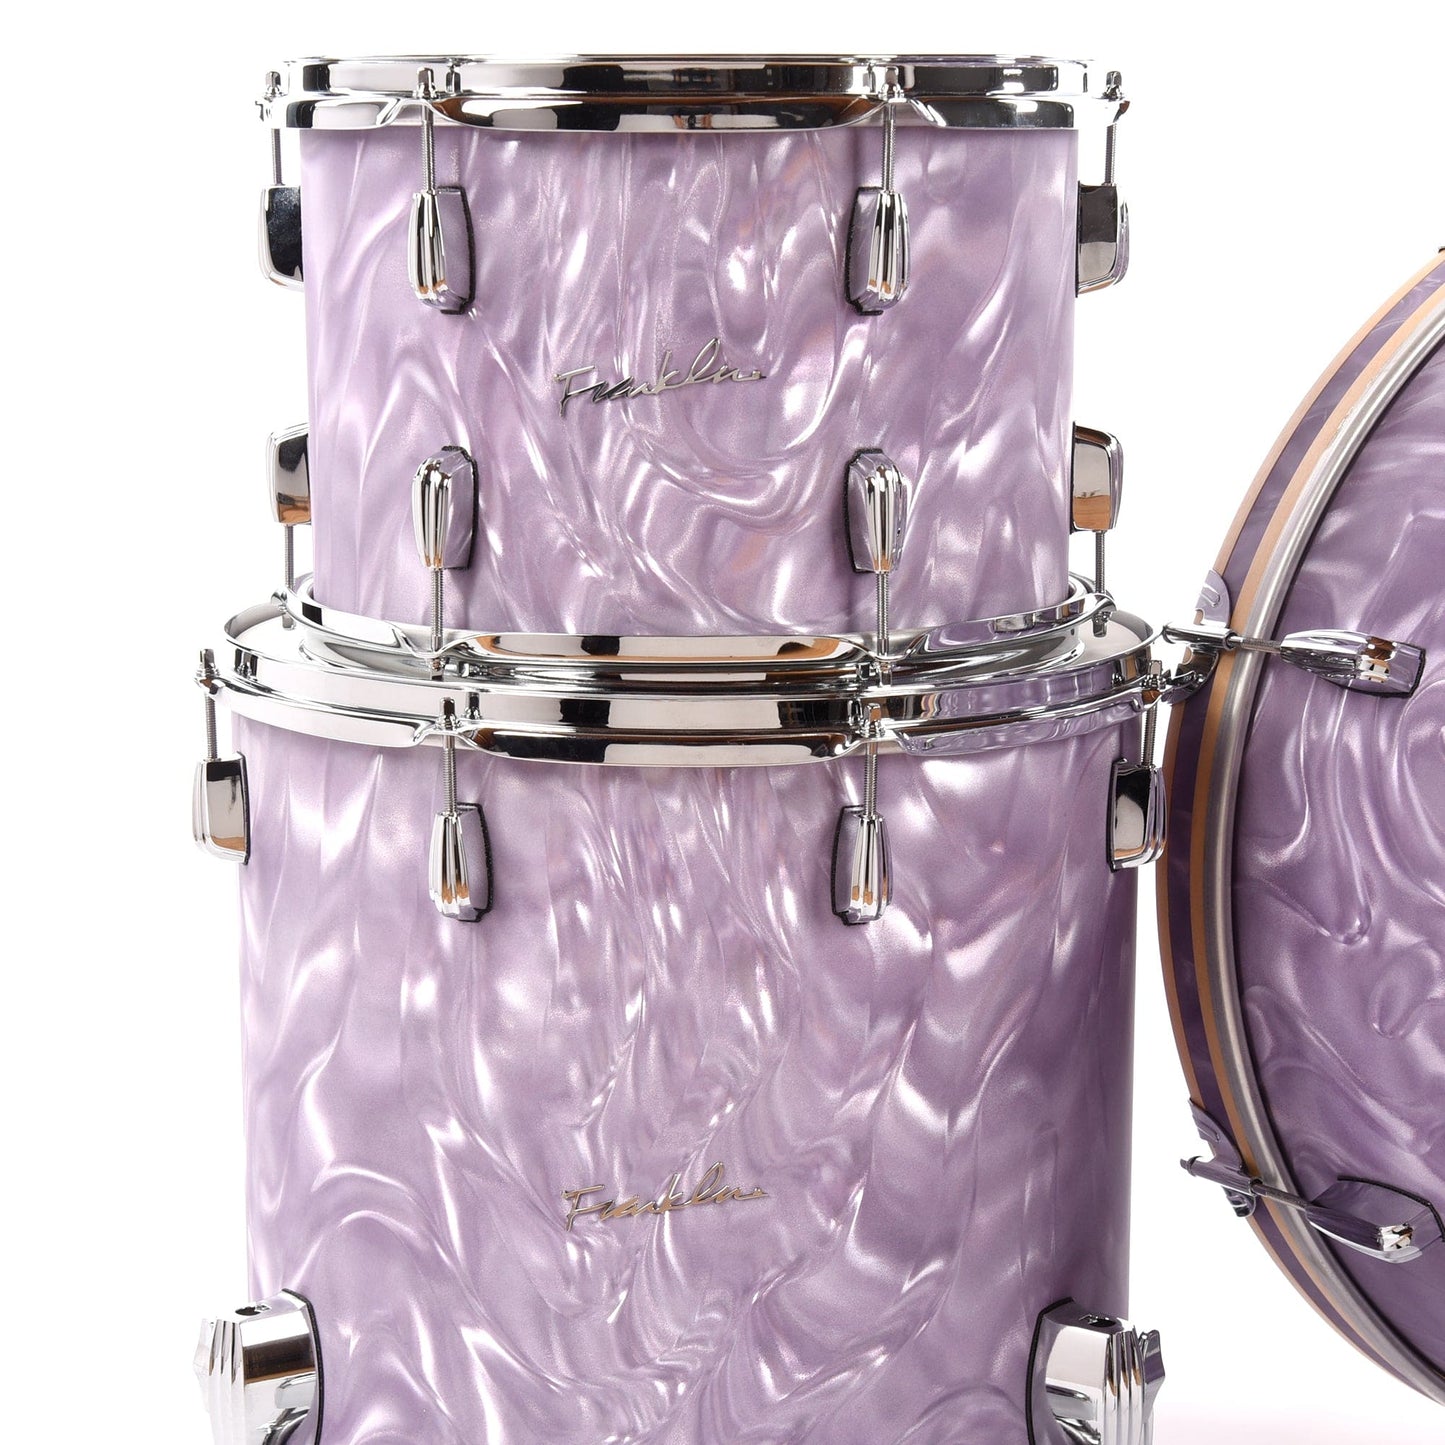 Franklin Drum Co. 13/16/24 3pc. Mahogany Drum Kit Lavender Satin Flame Drums and Percussion / Acoustic Drums / Full Acoustic Kits